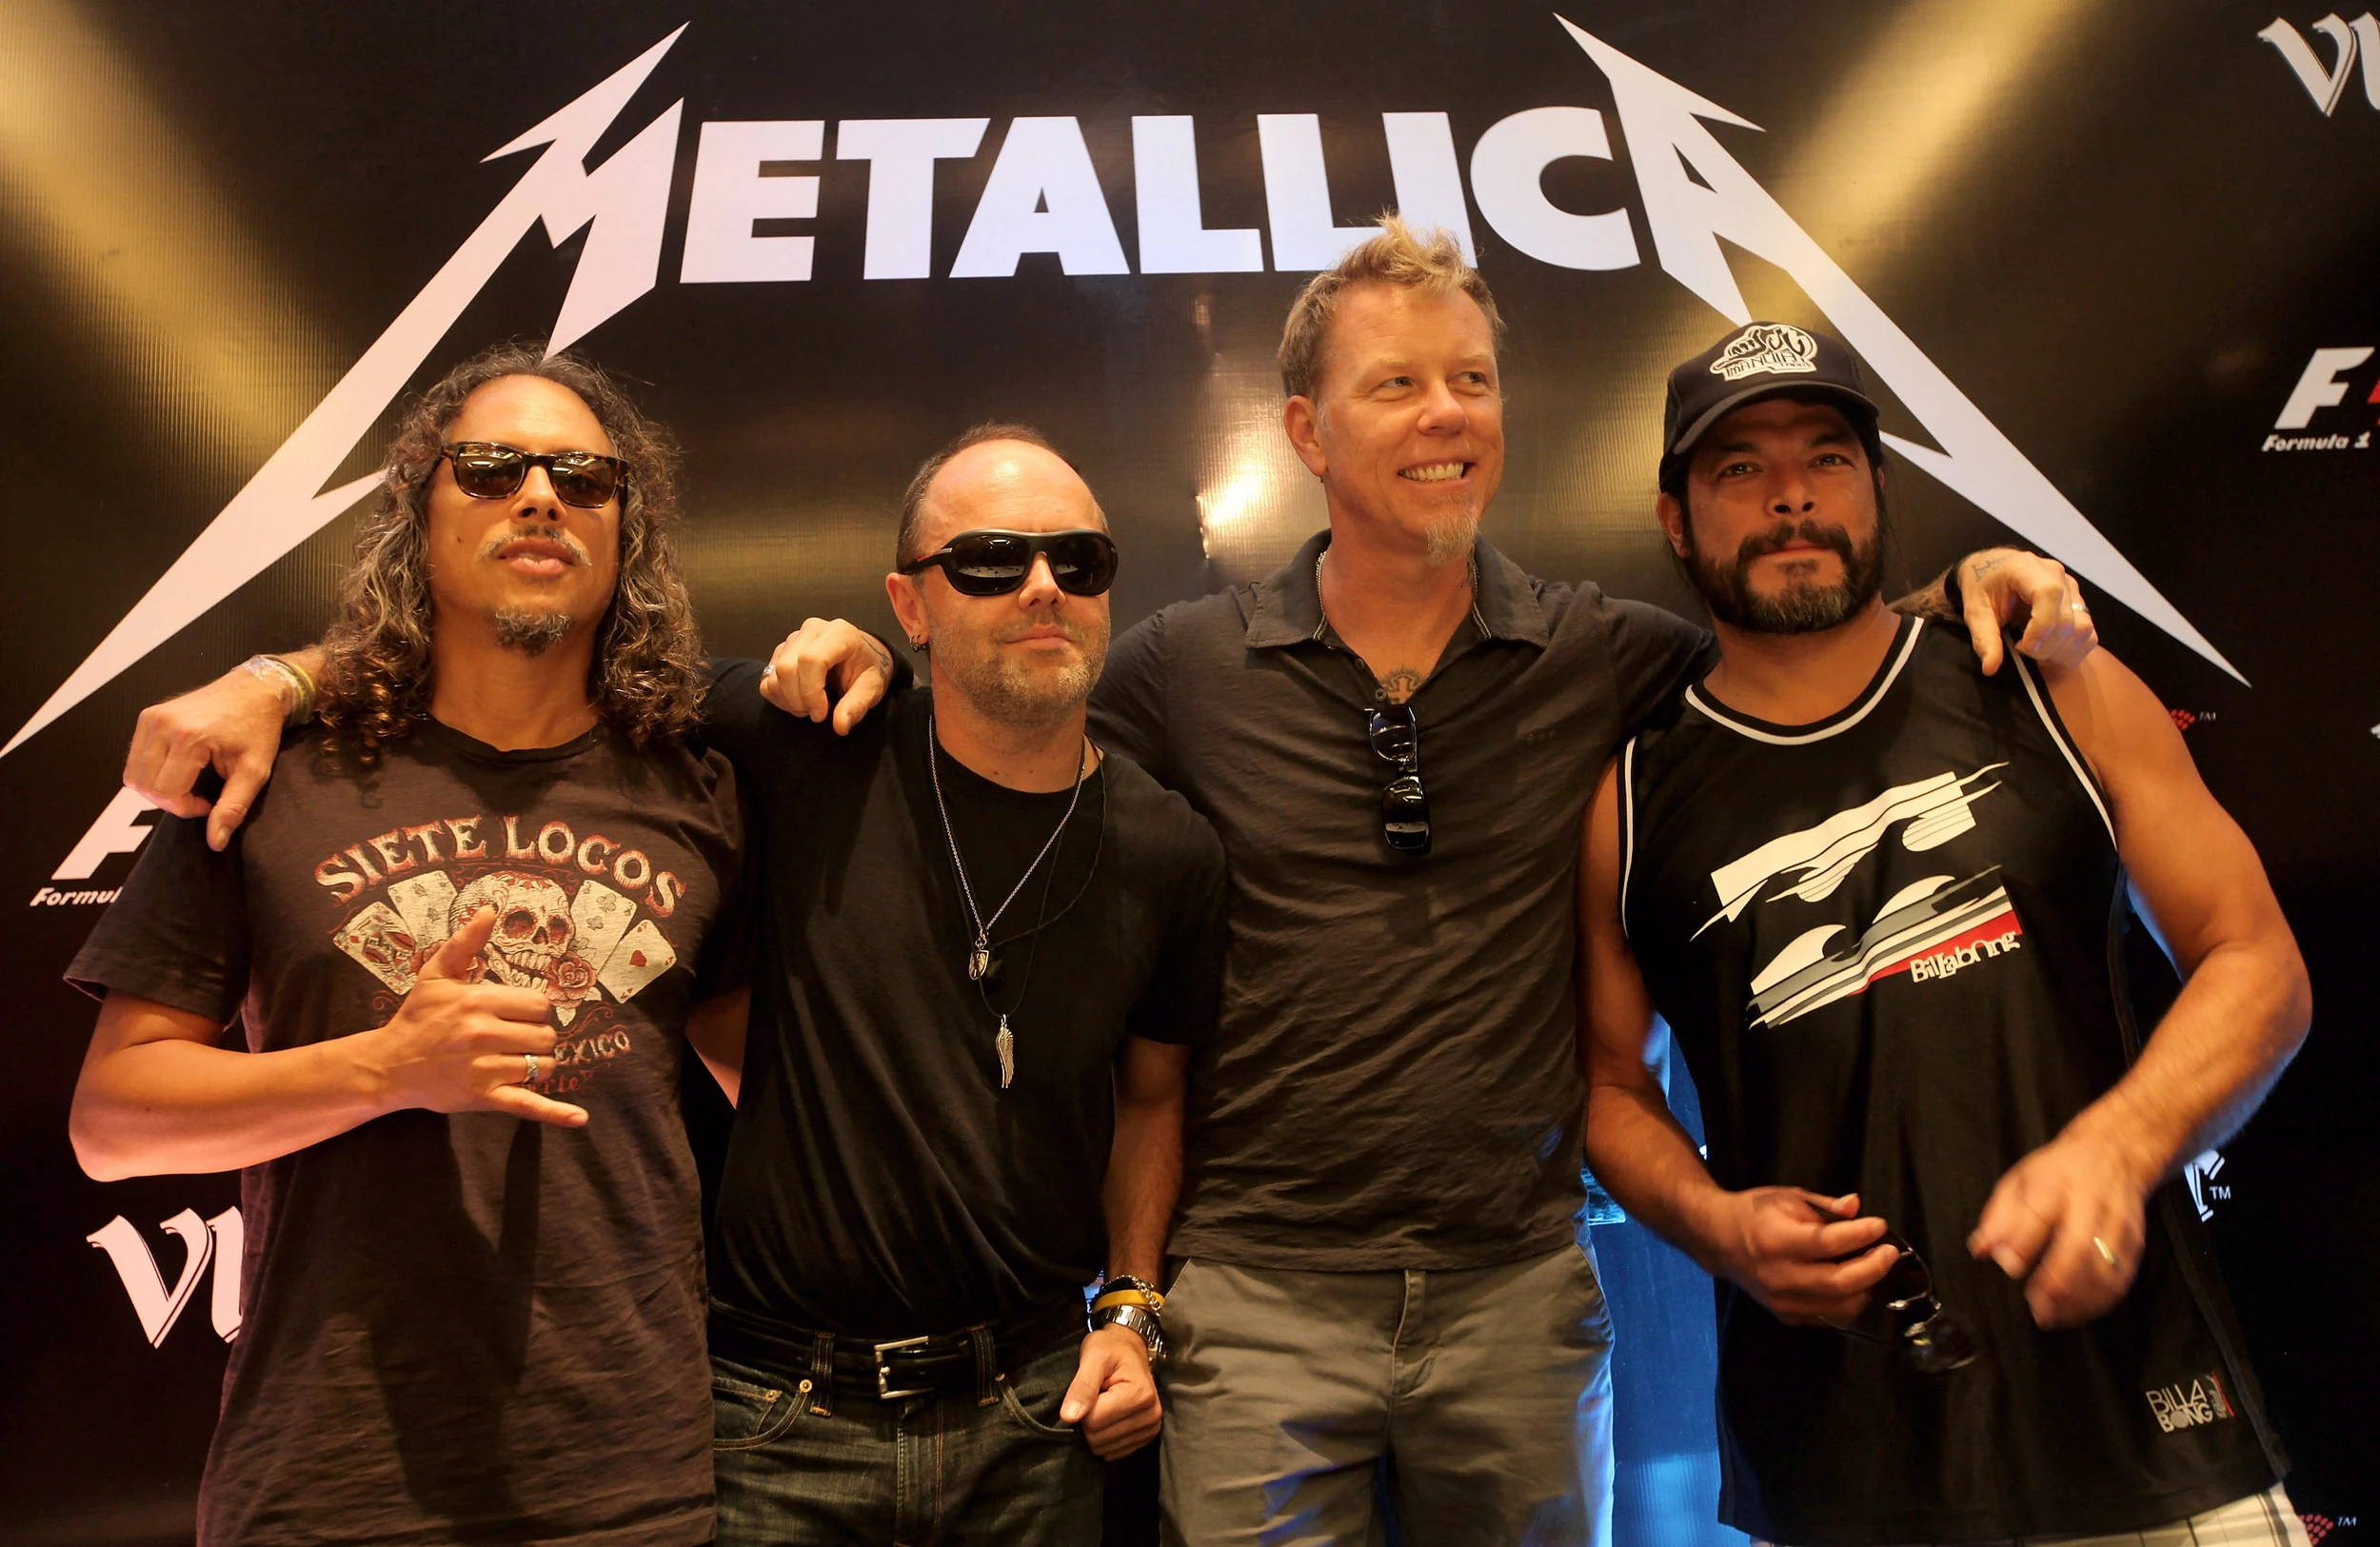 Metallica to Play Gillette Stadium! Who Are The 4 Special Guests?